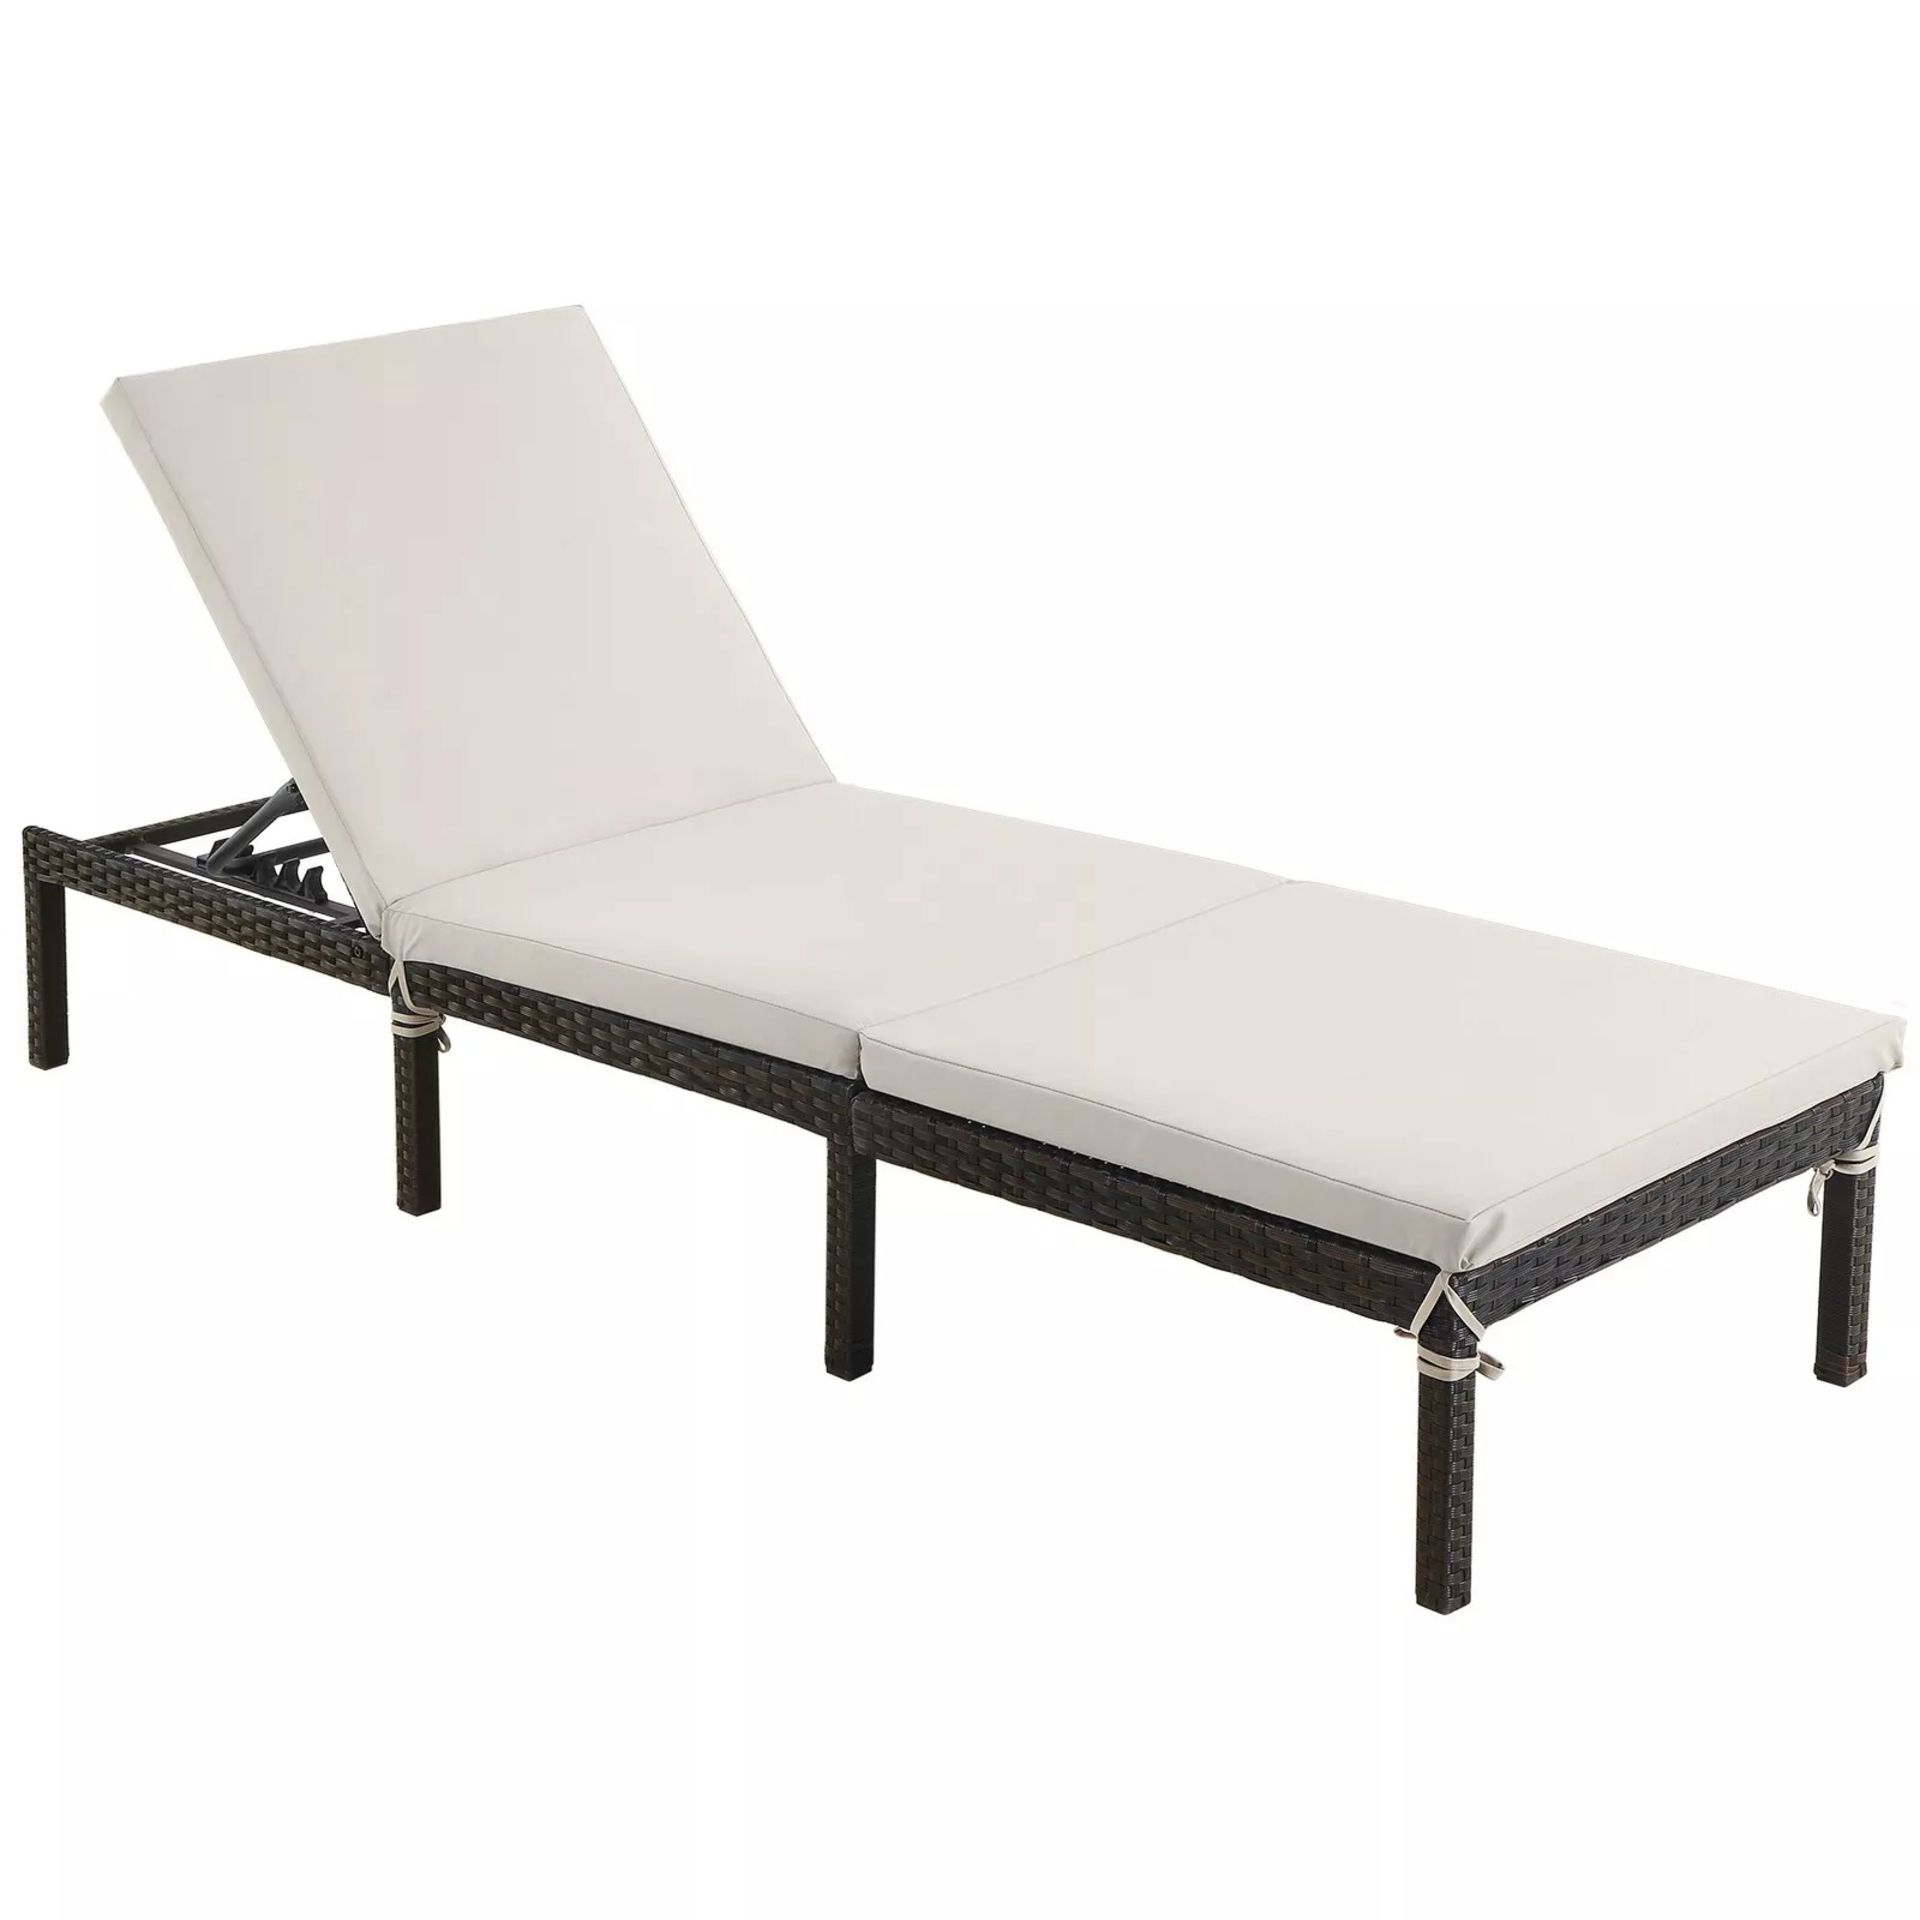 FREE DELIVERY - BRAND NEW SUN LOUNGER SUNBED 5 CM THICK MATTRESS